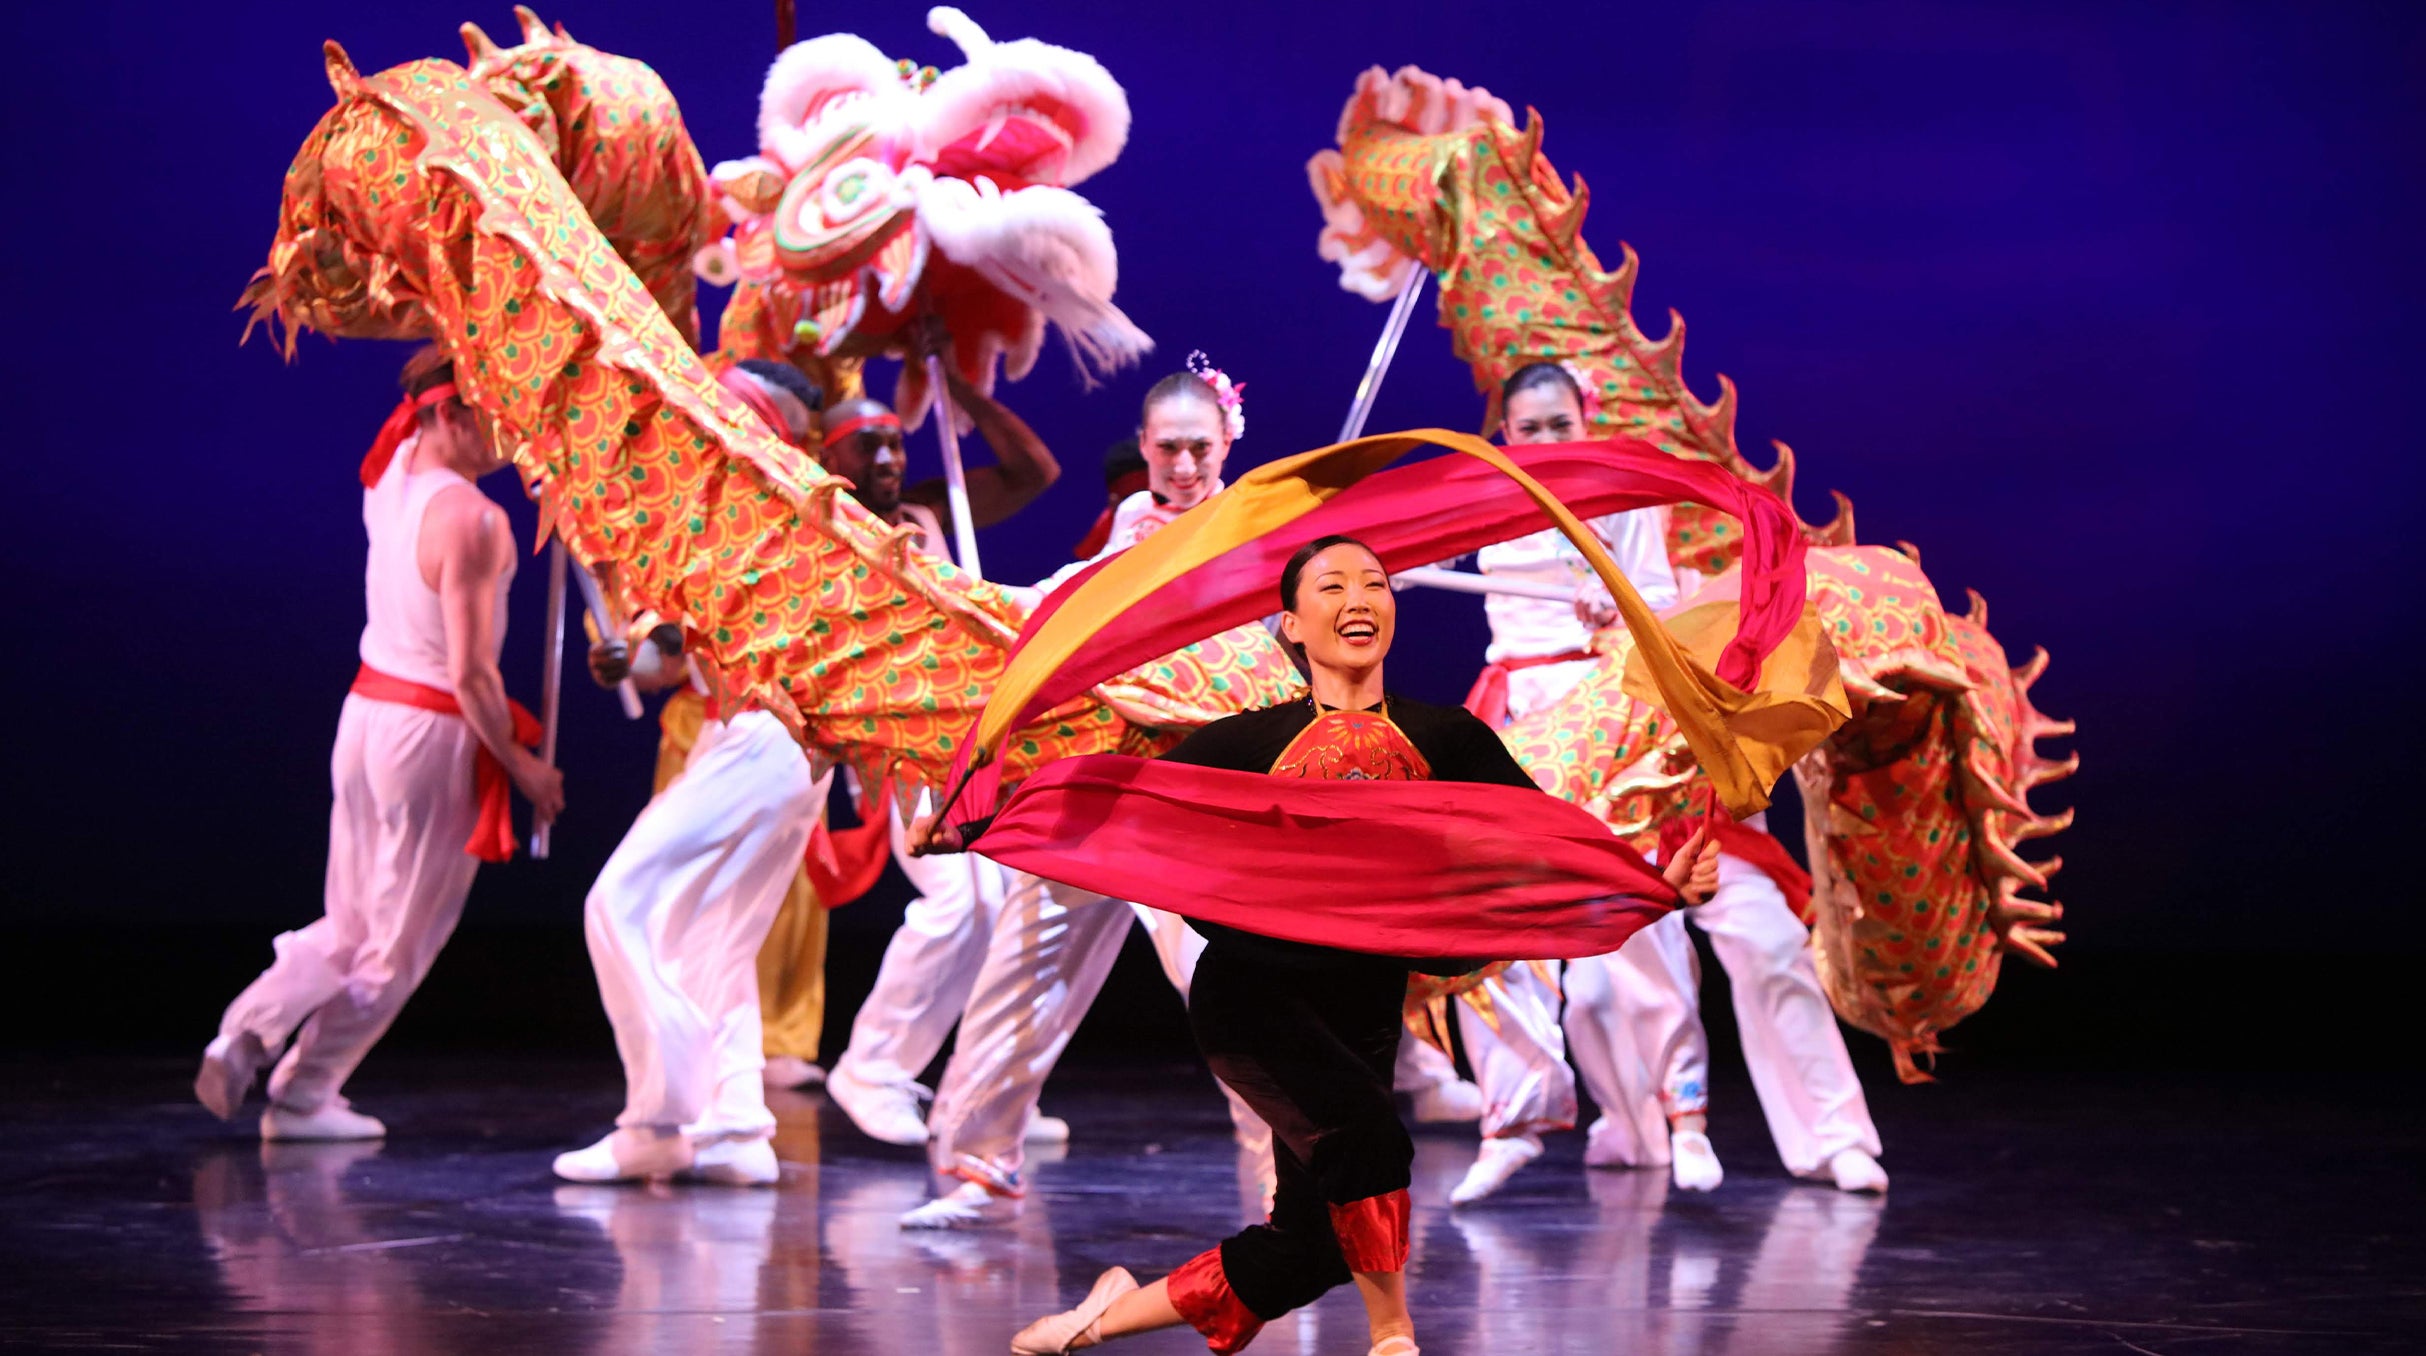 Nai-Ni Chen Dance Company: Lunar New Year Celebration in Queens promo photo for Ticketmaster ONLINE presale offer code